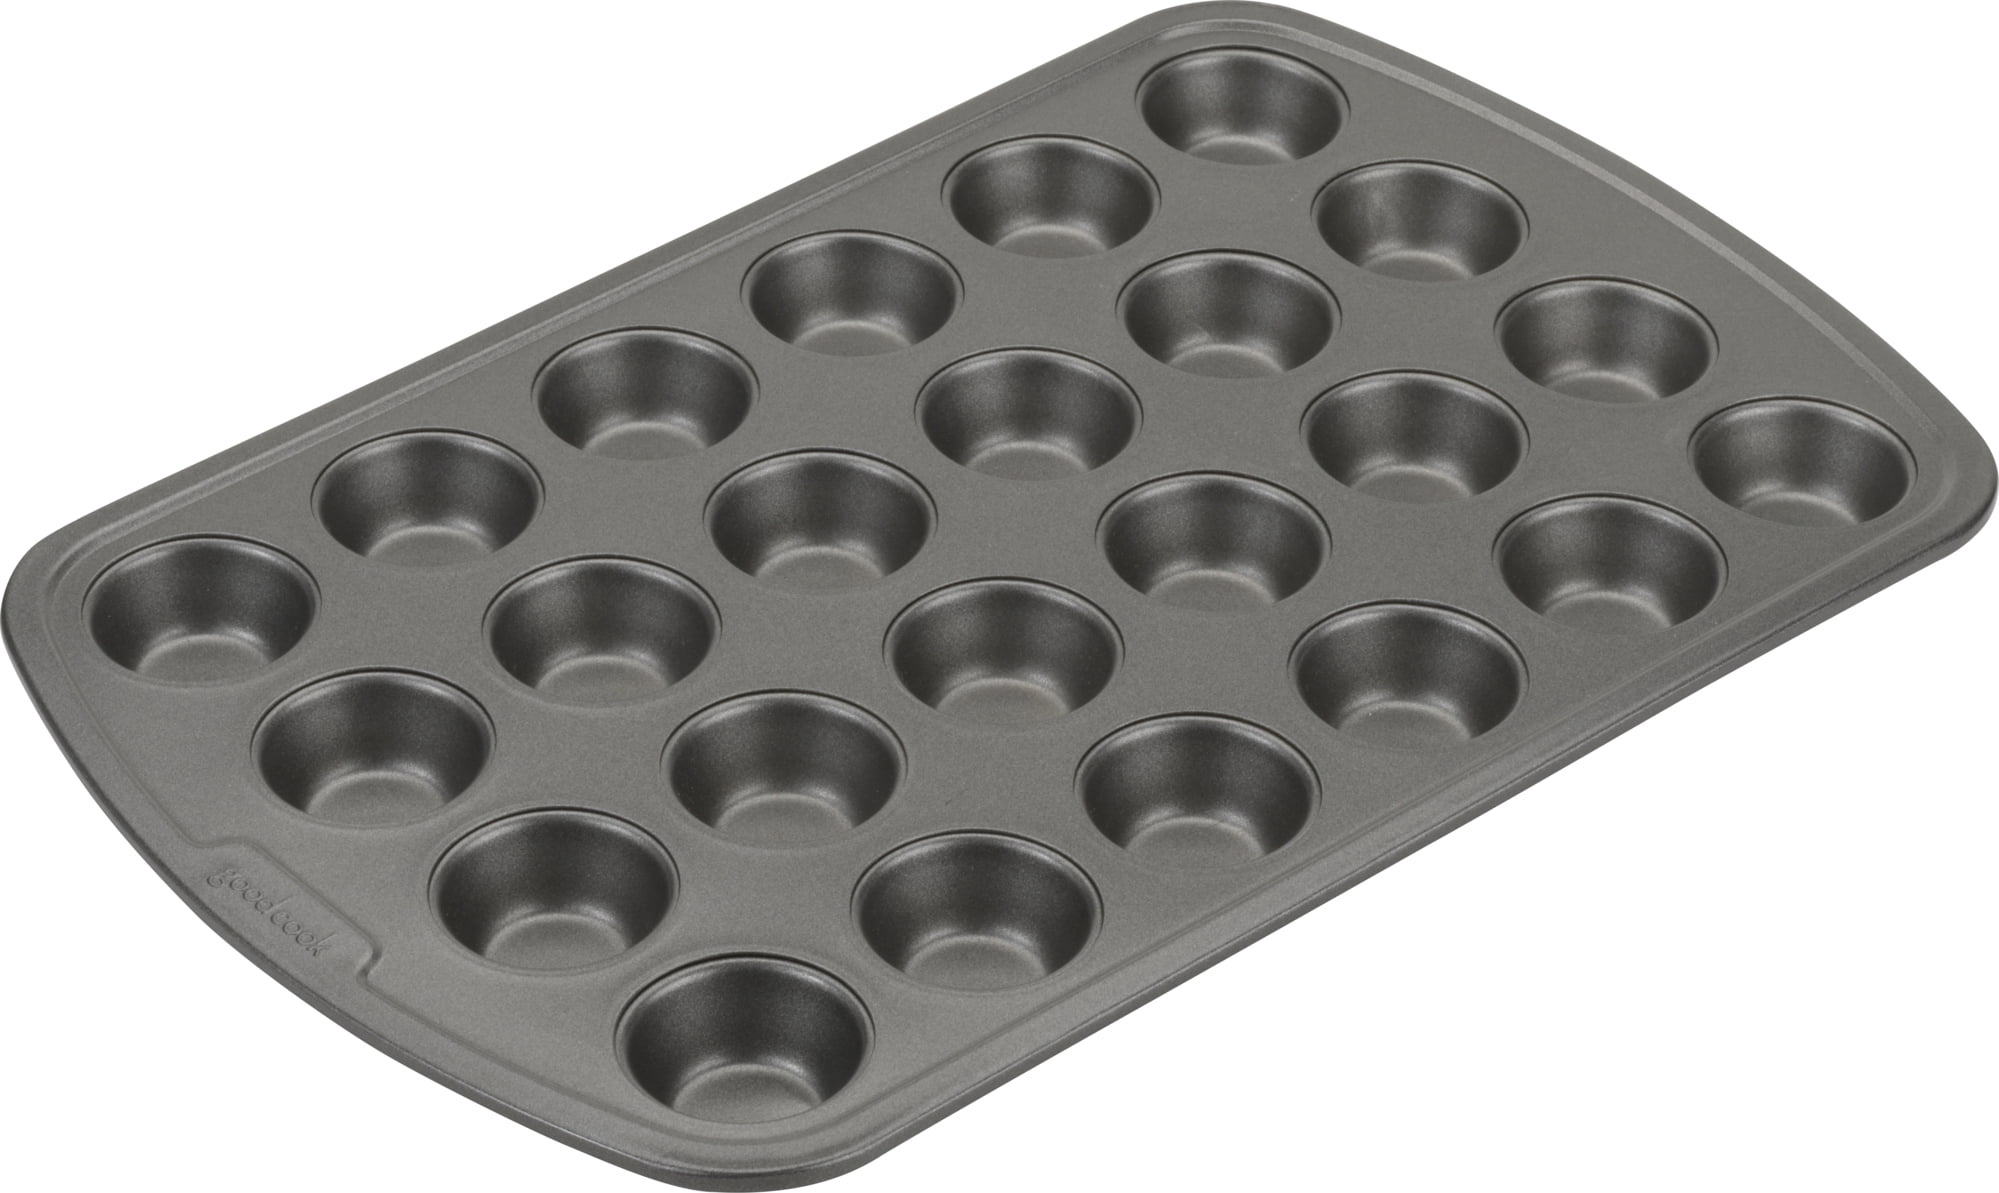 In the Potter's Kitchen: Custom Muffin Pan